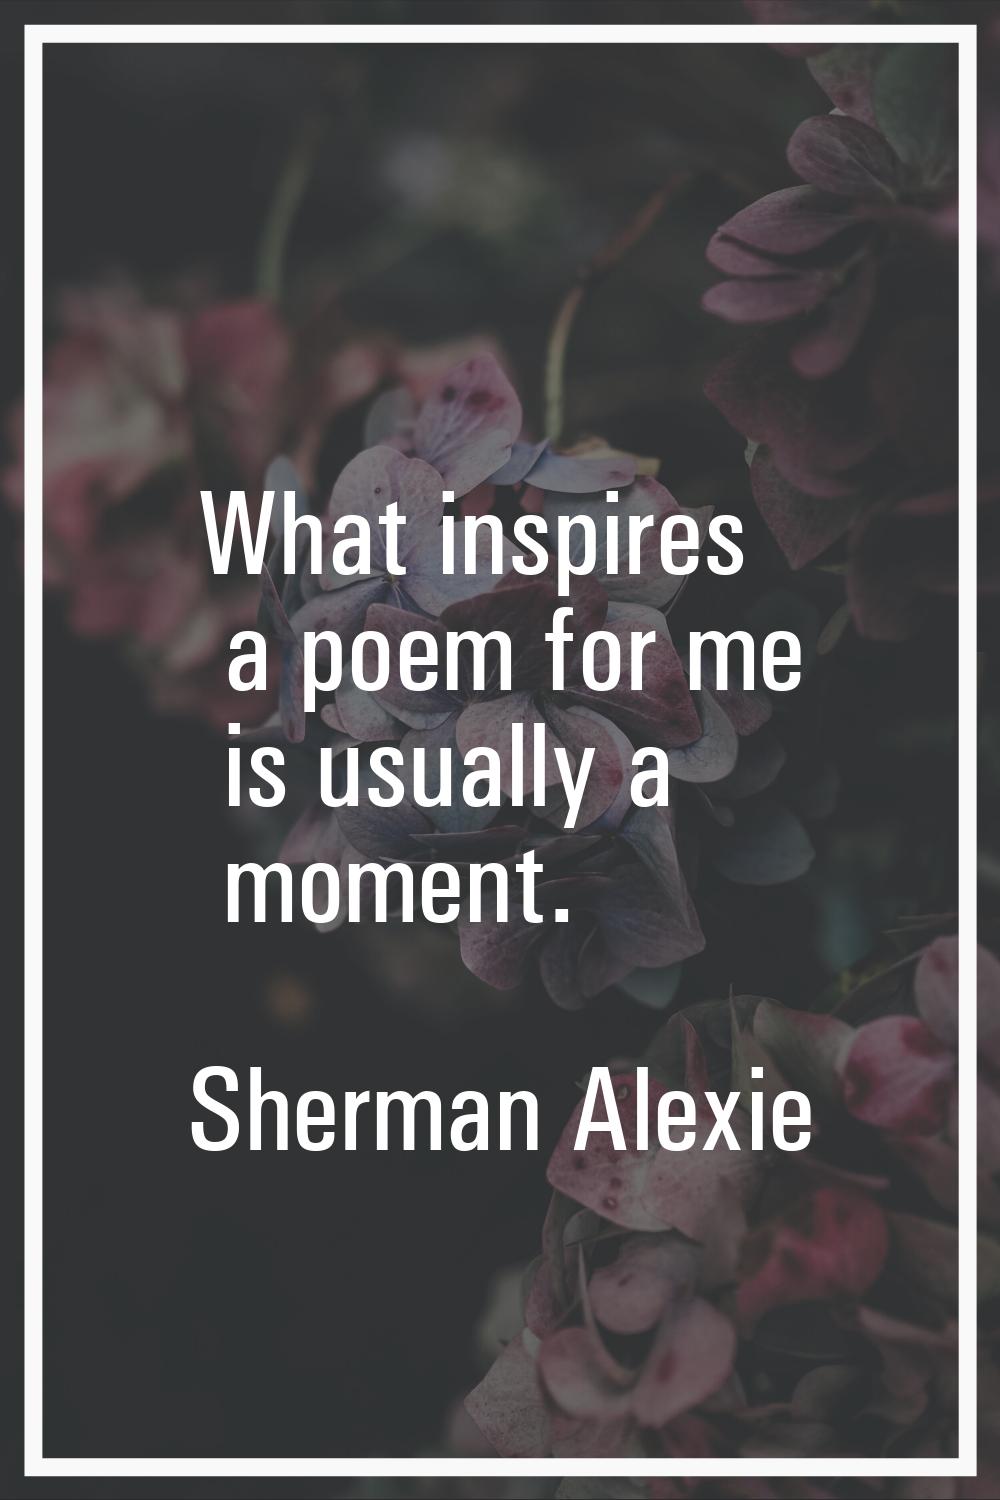 What inspires a poem for me is usually a moment.